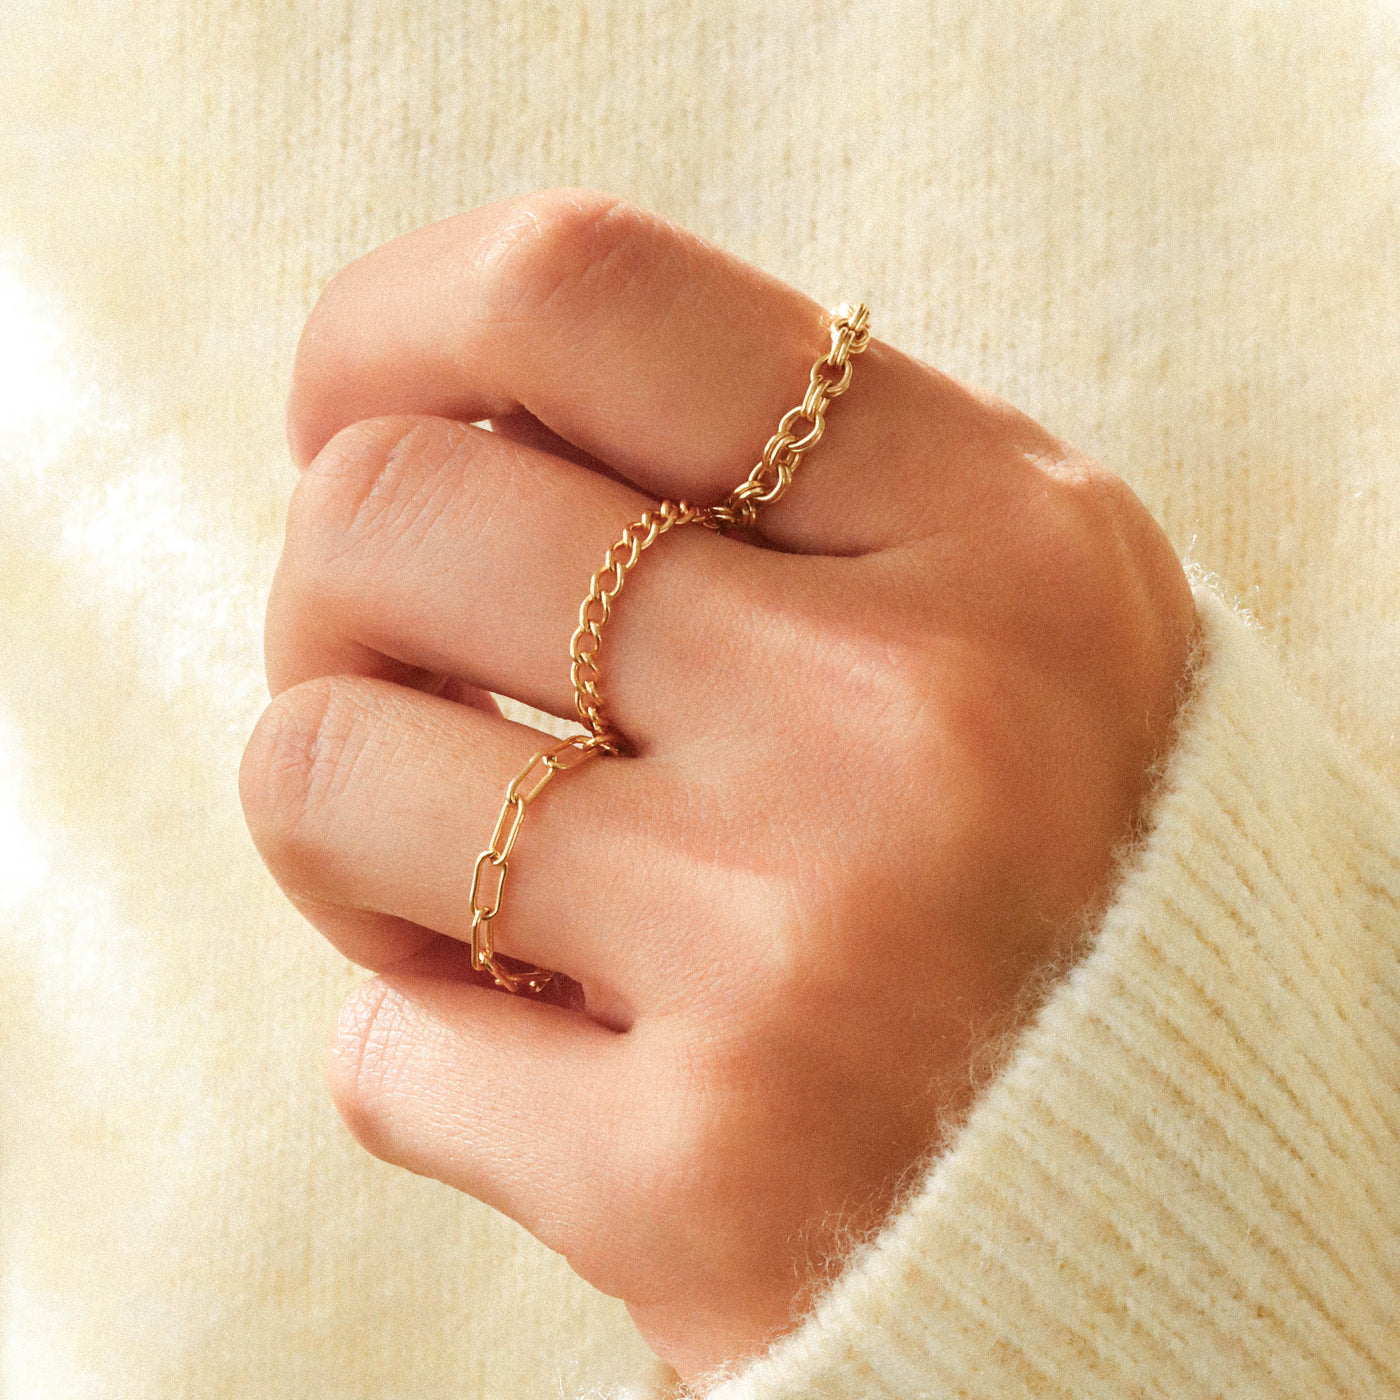 Gold stacking chain rings